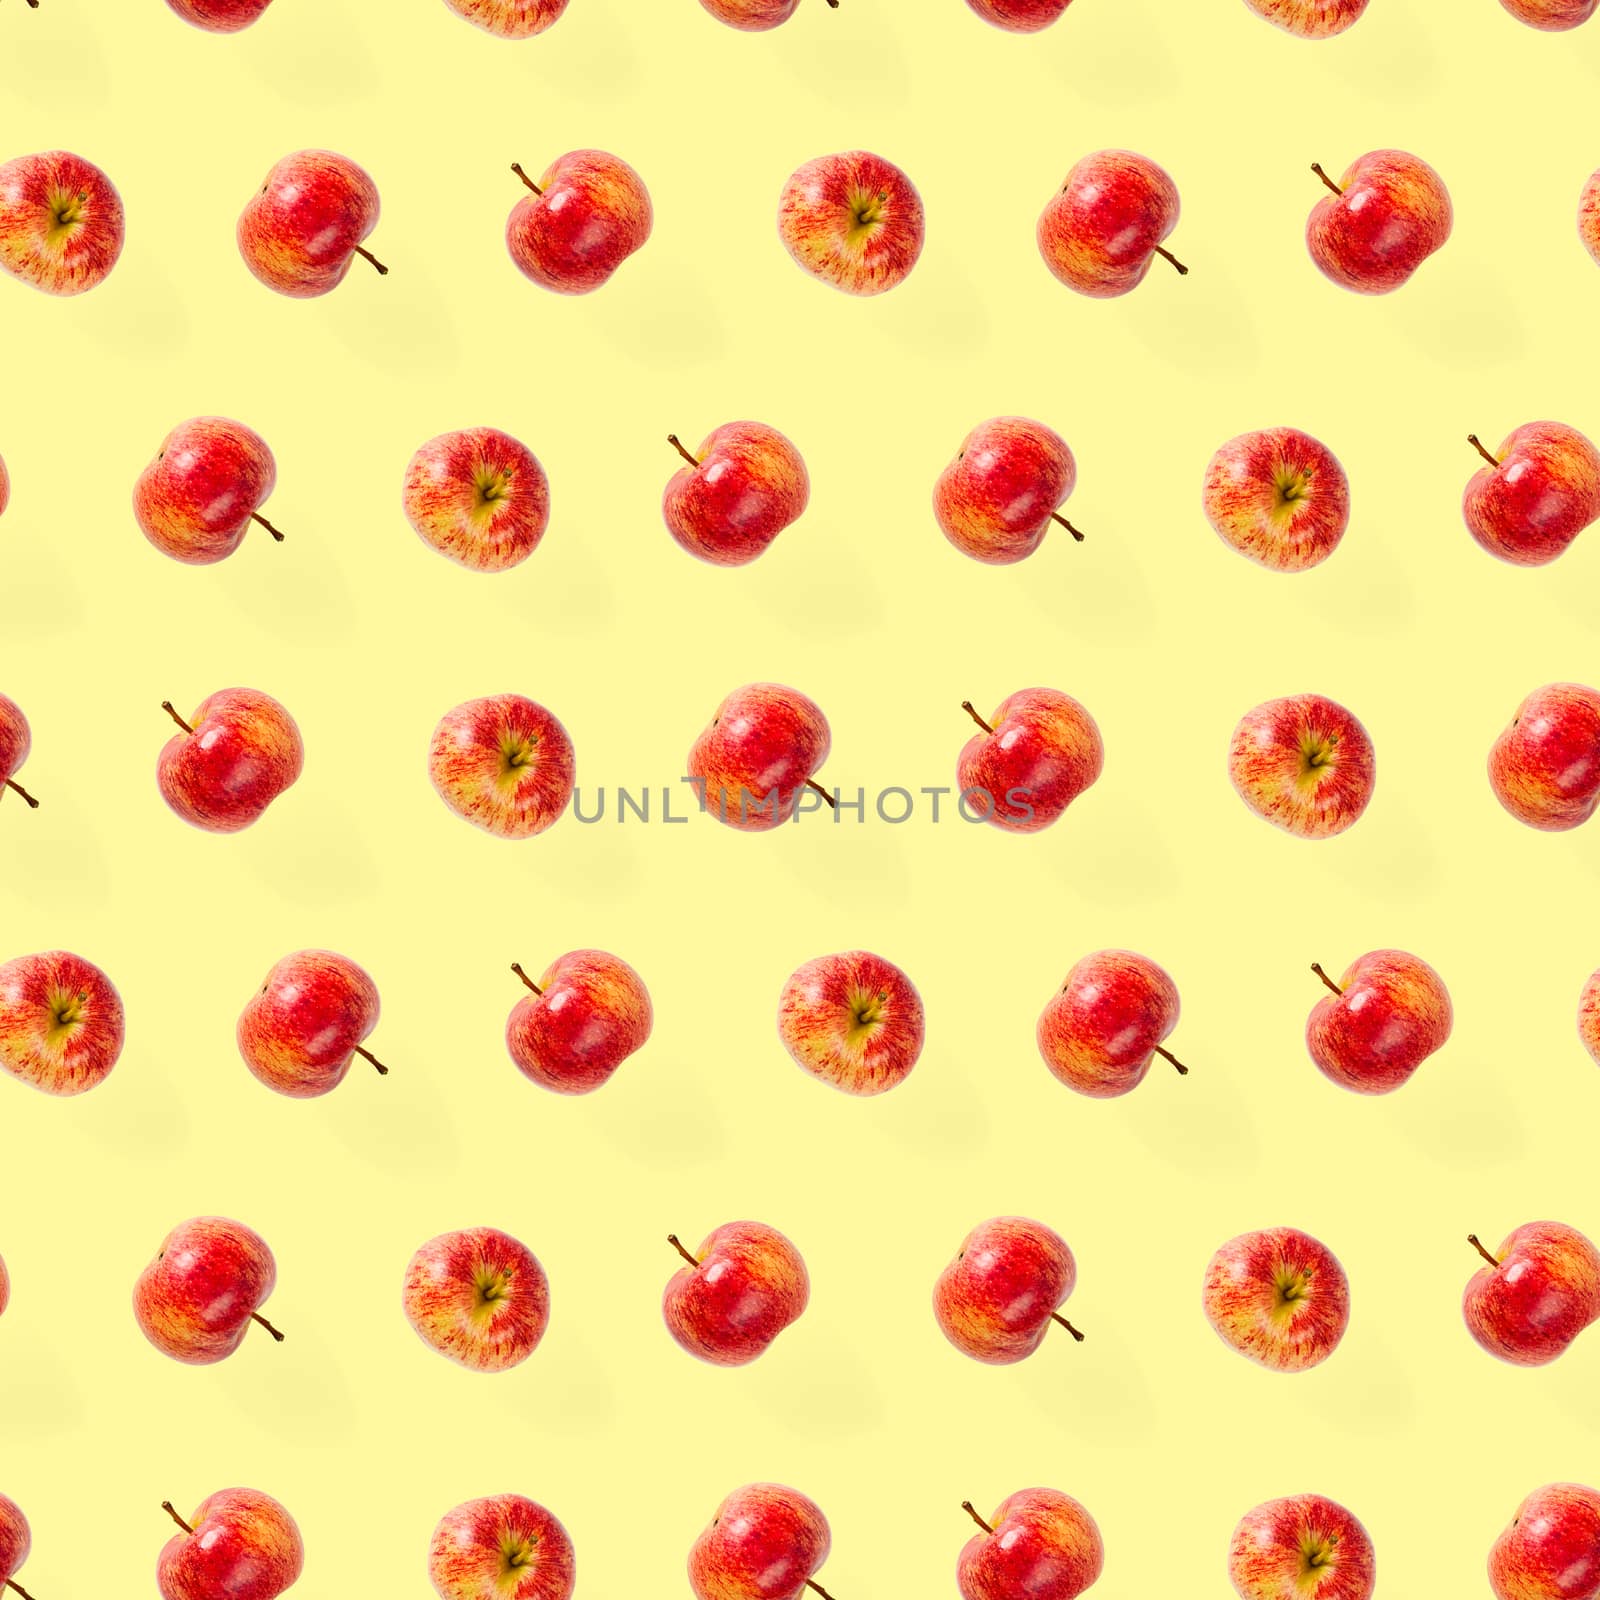 Seamless pattern with ripe apples. Apple seamless pattern on yellow background. Tropical fruit abstract background.